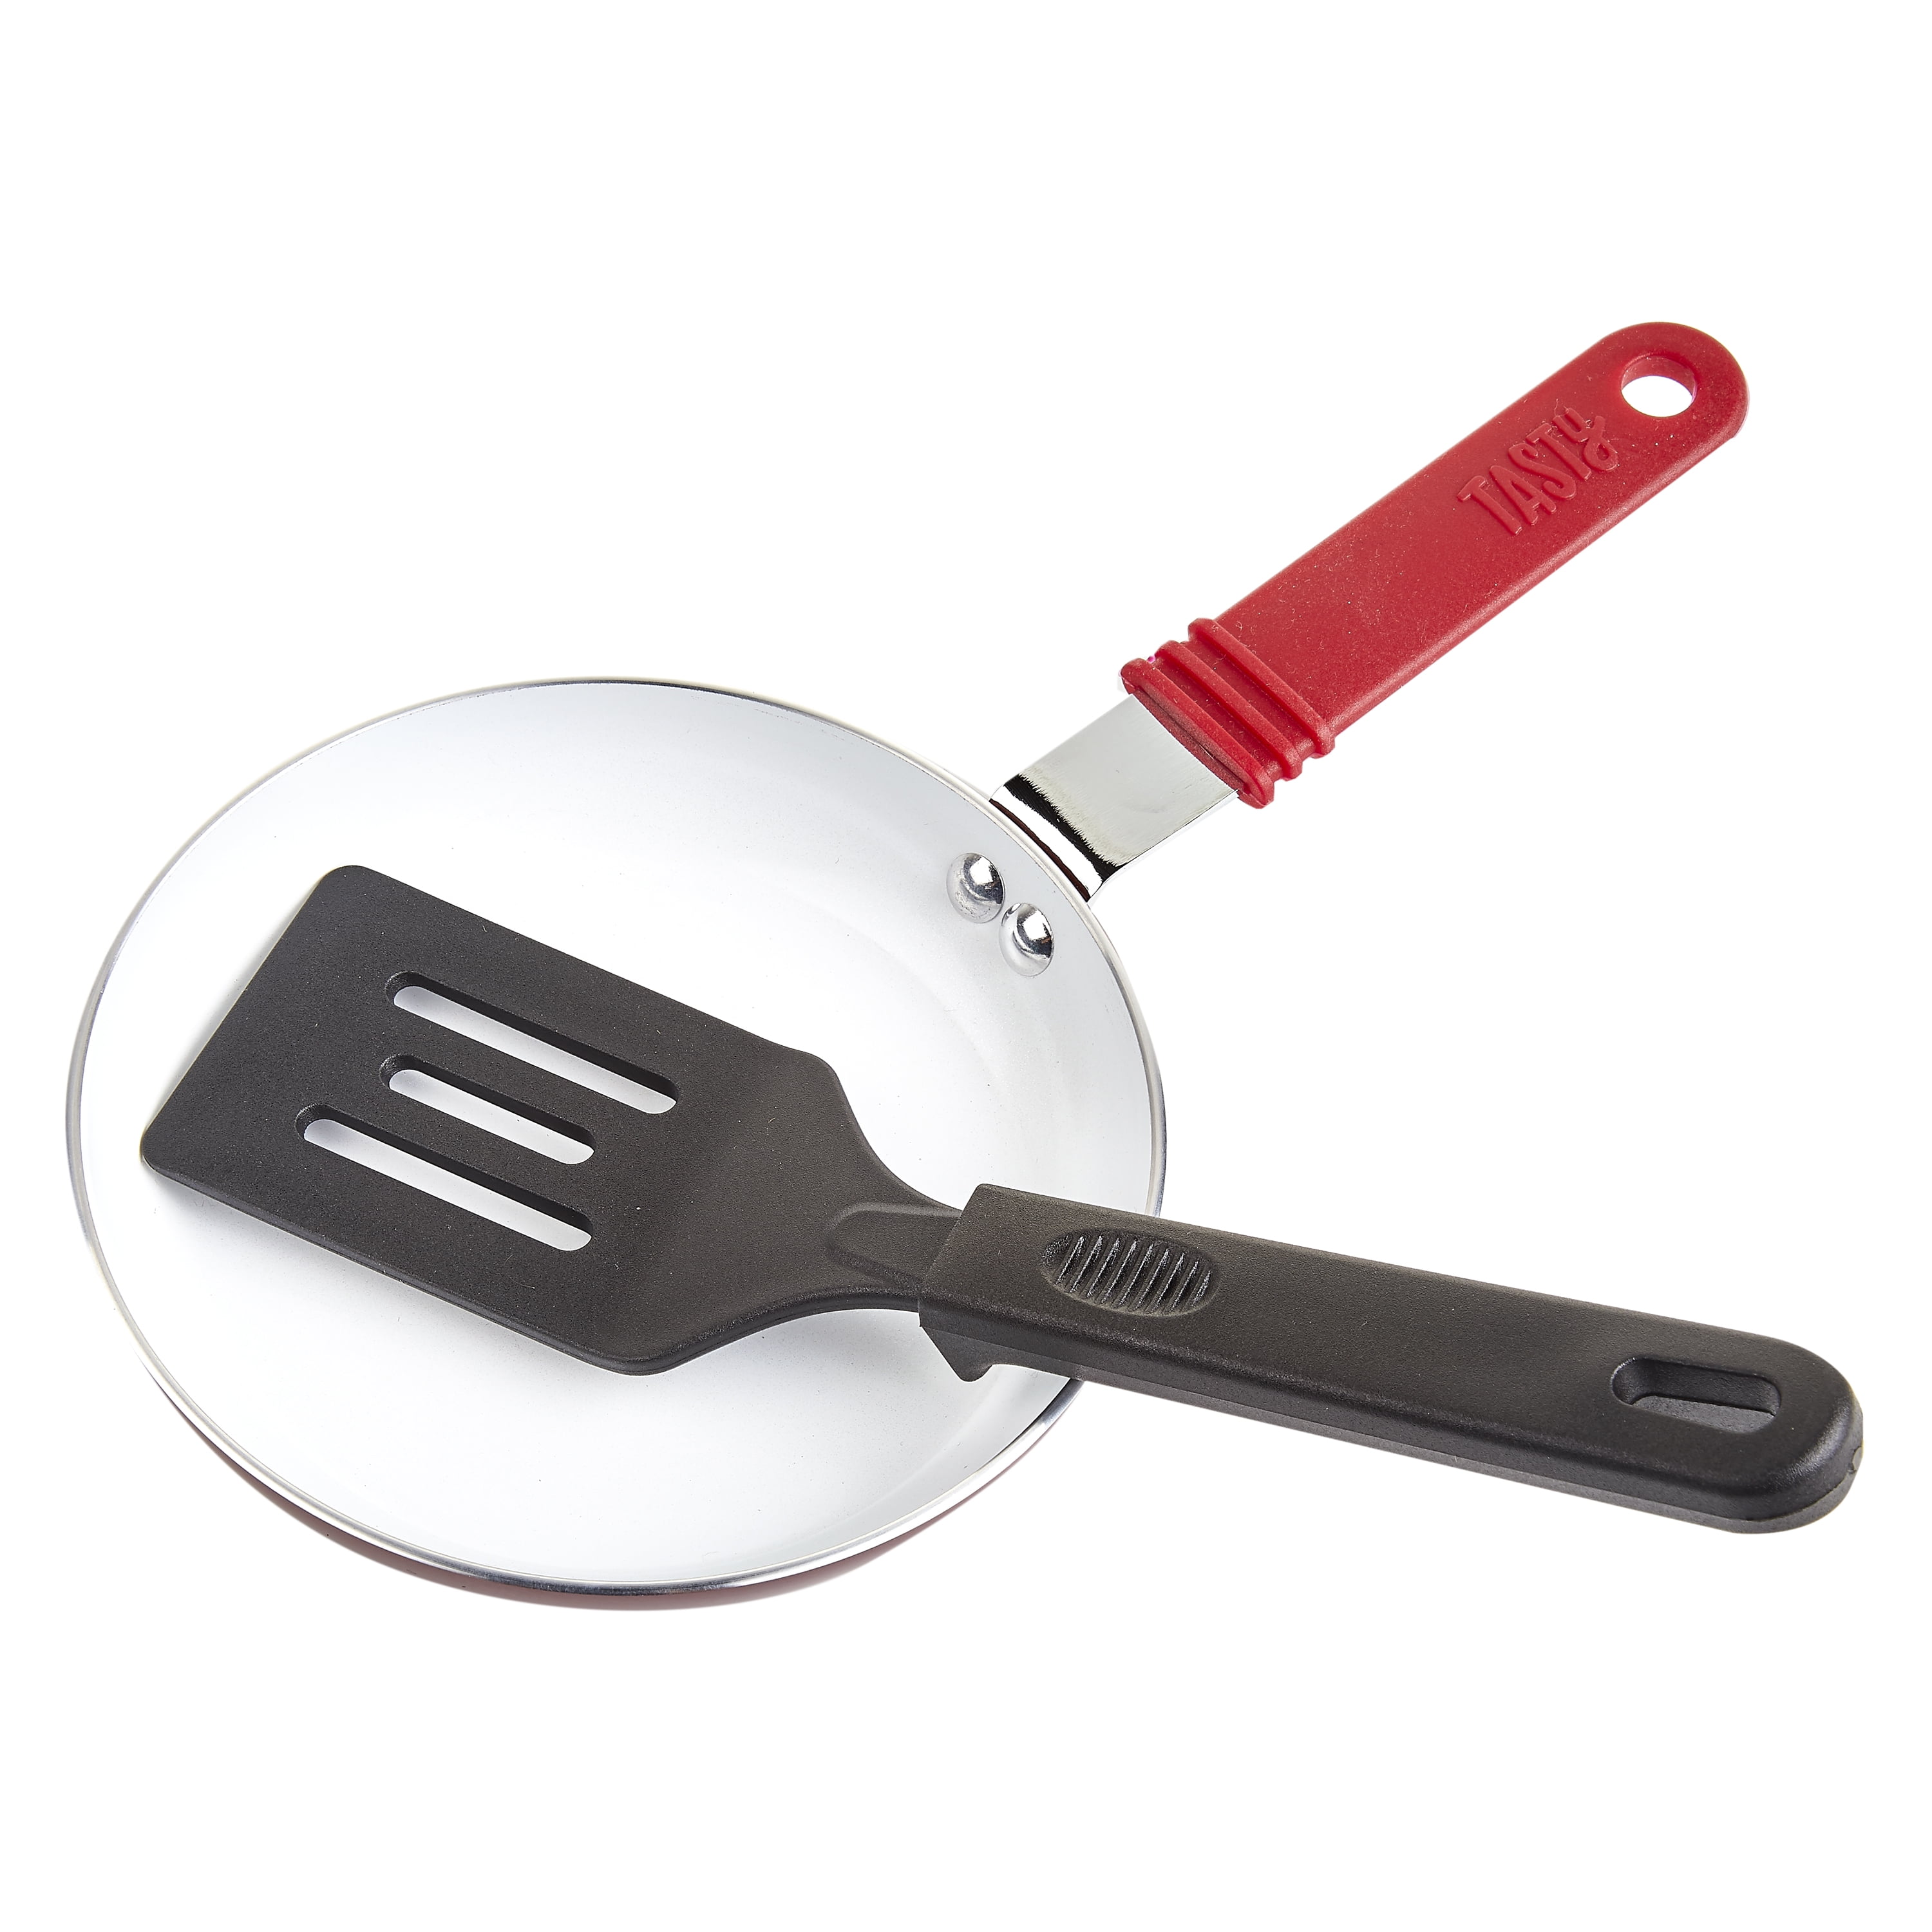 Tefal Pans (75 products) compare today & find prices »